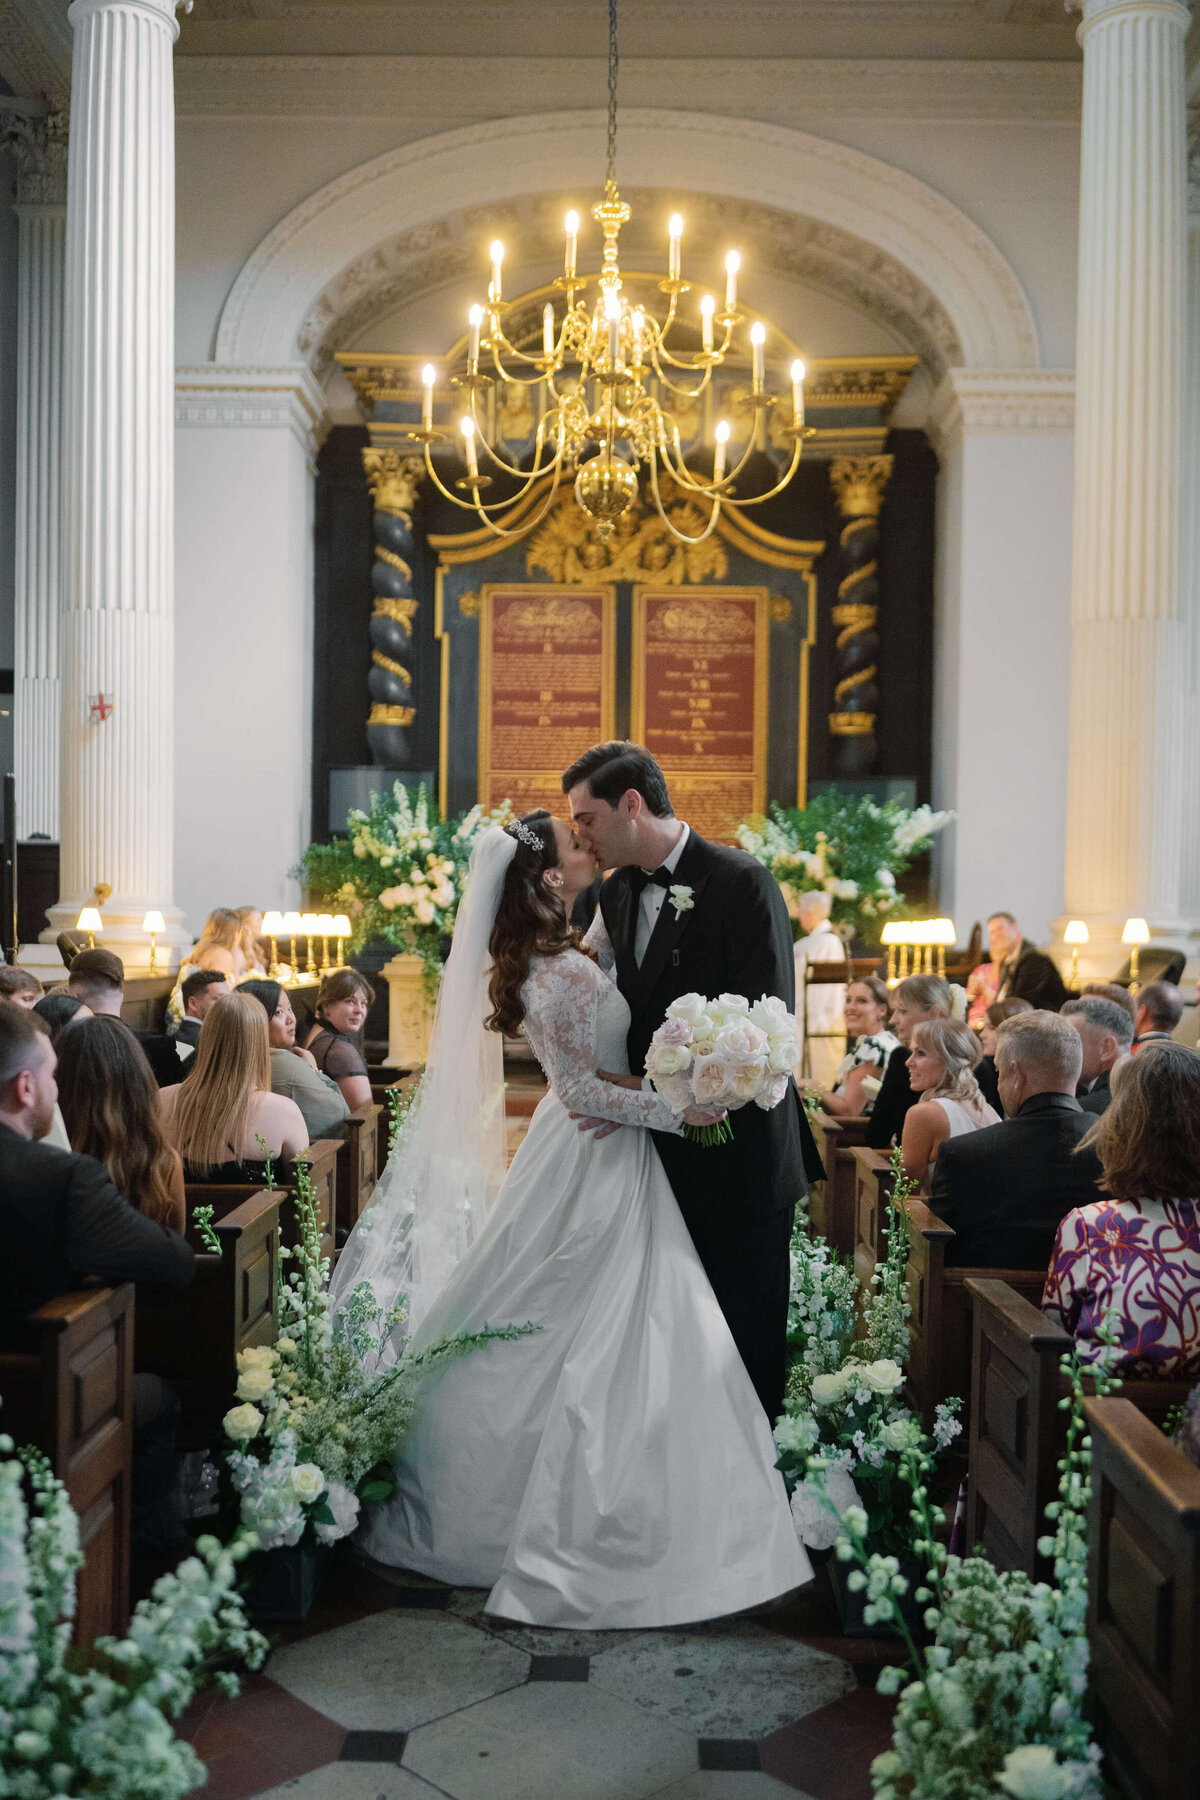 bride and groom kiss on their wedding aisle which is decorated with meadows of green and white flowers at their church wedding ceremony in london